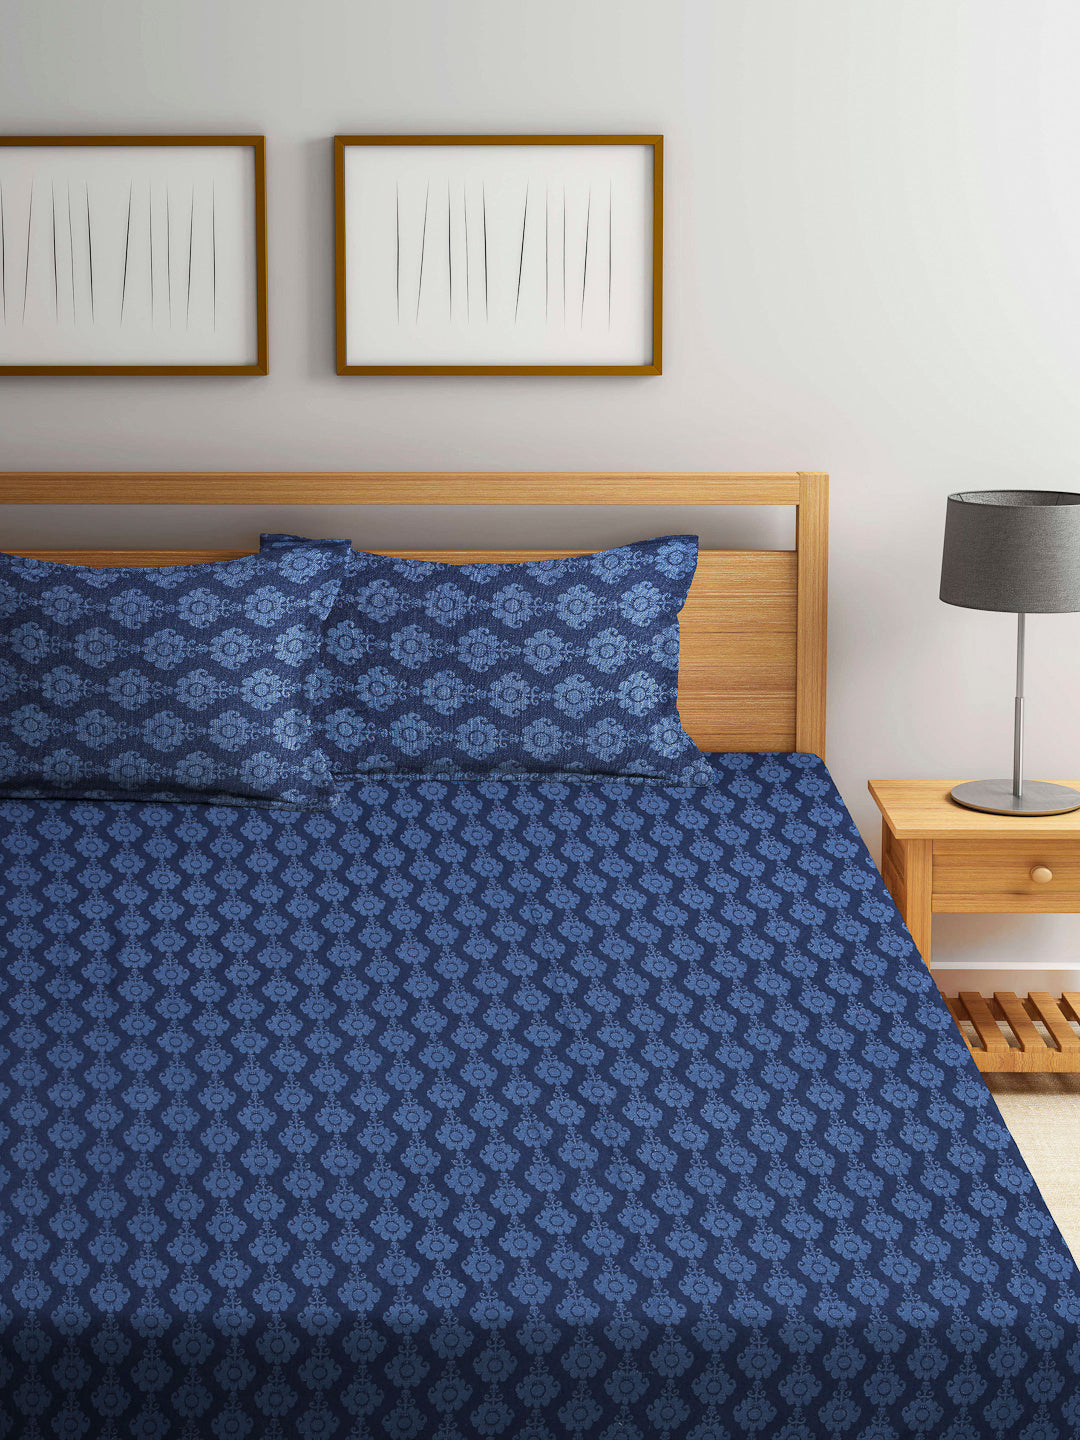 Arrabi Blue Indian Handwoven Cotton King Size Bedsheet with 2 Pillow Covers (260 X 230 cm)